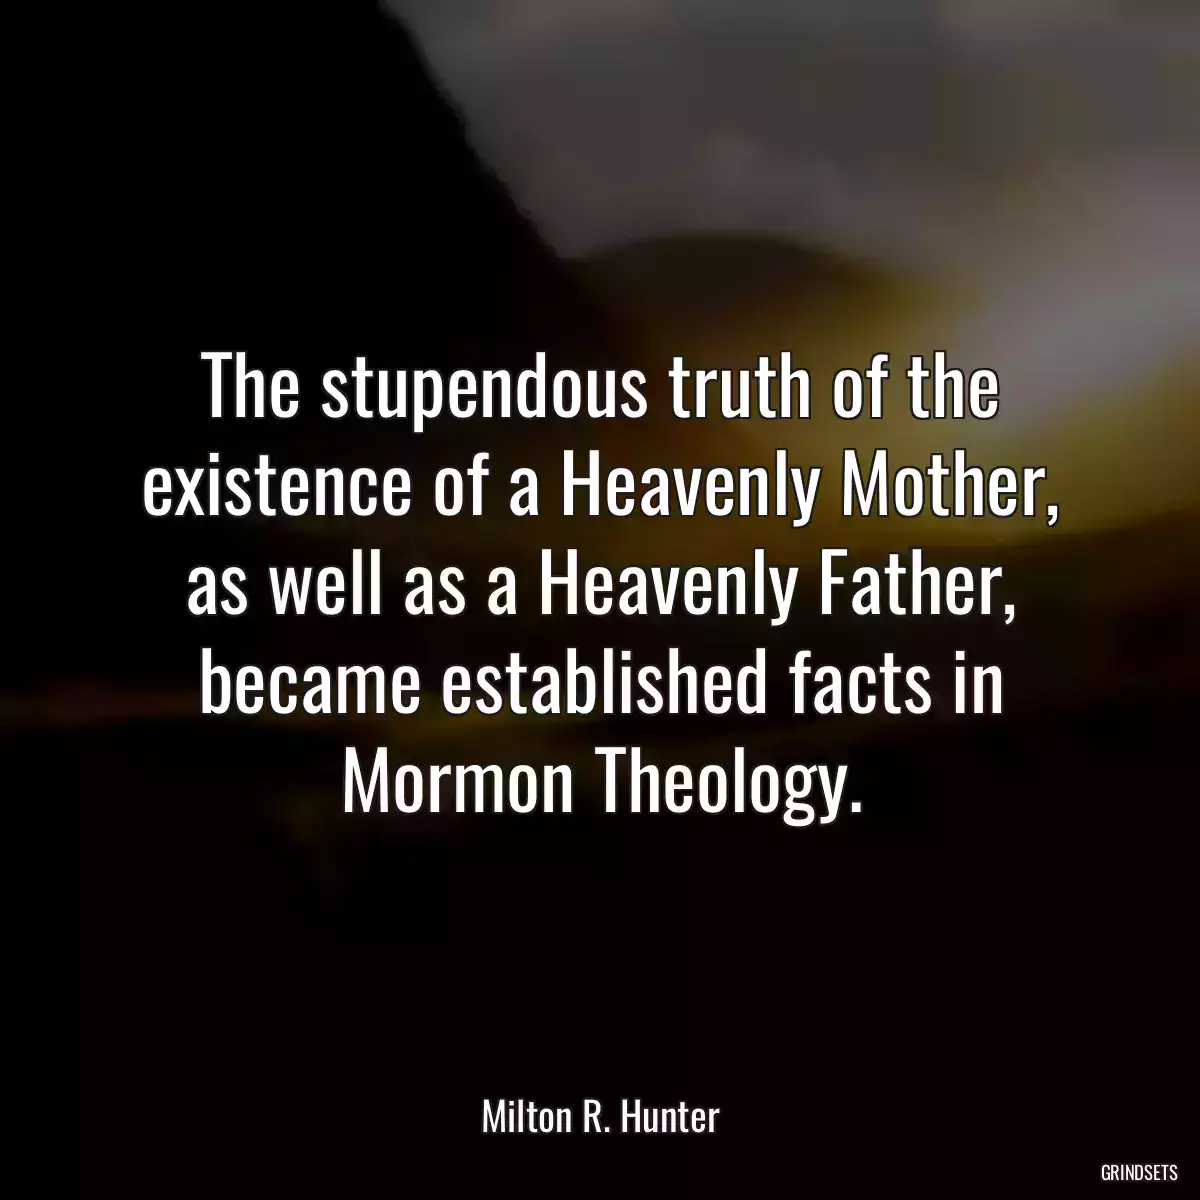 The stupendous truth of the existence of a Heavenly Mother, as well as a Heavenly Father, became established facts in Mormon Theology.